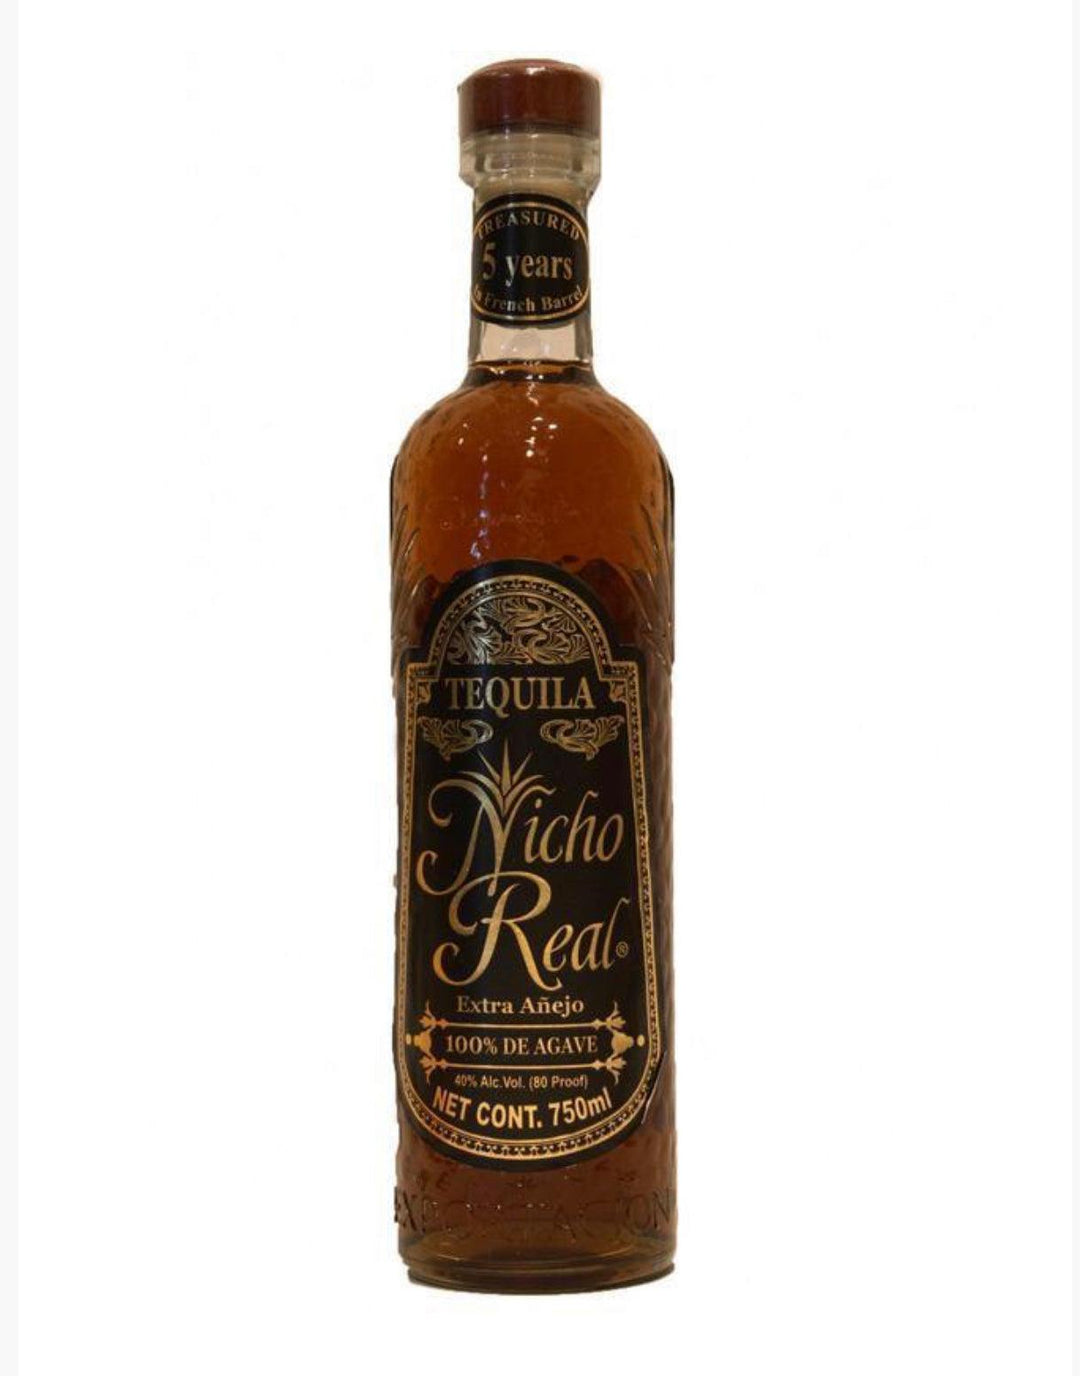 Nicho Real Extra Anejo Tequila - Liquor Luxe